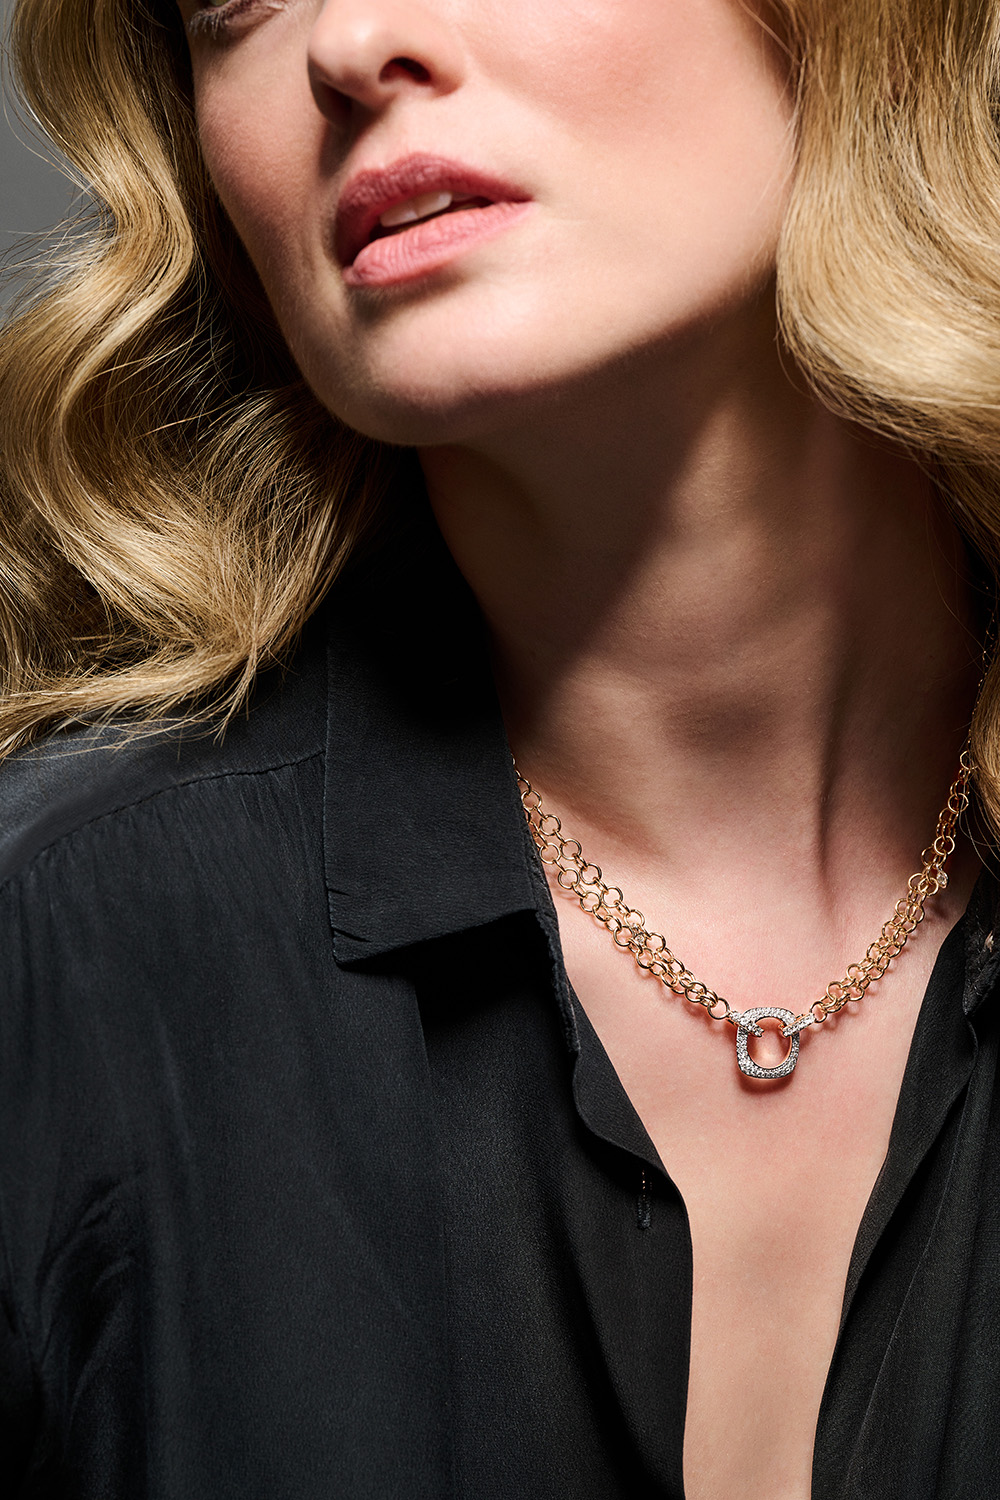 Elements necklace made with 18kt rose gold and white diamonds worn by a model